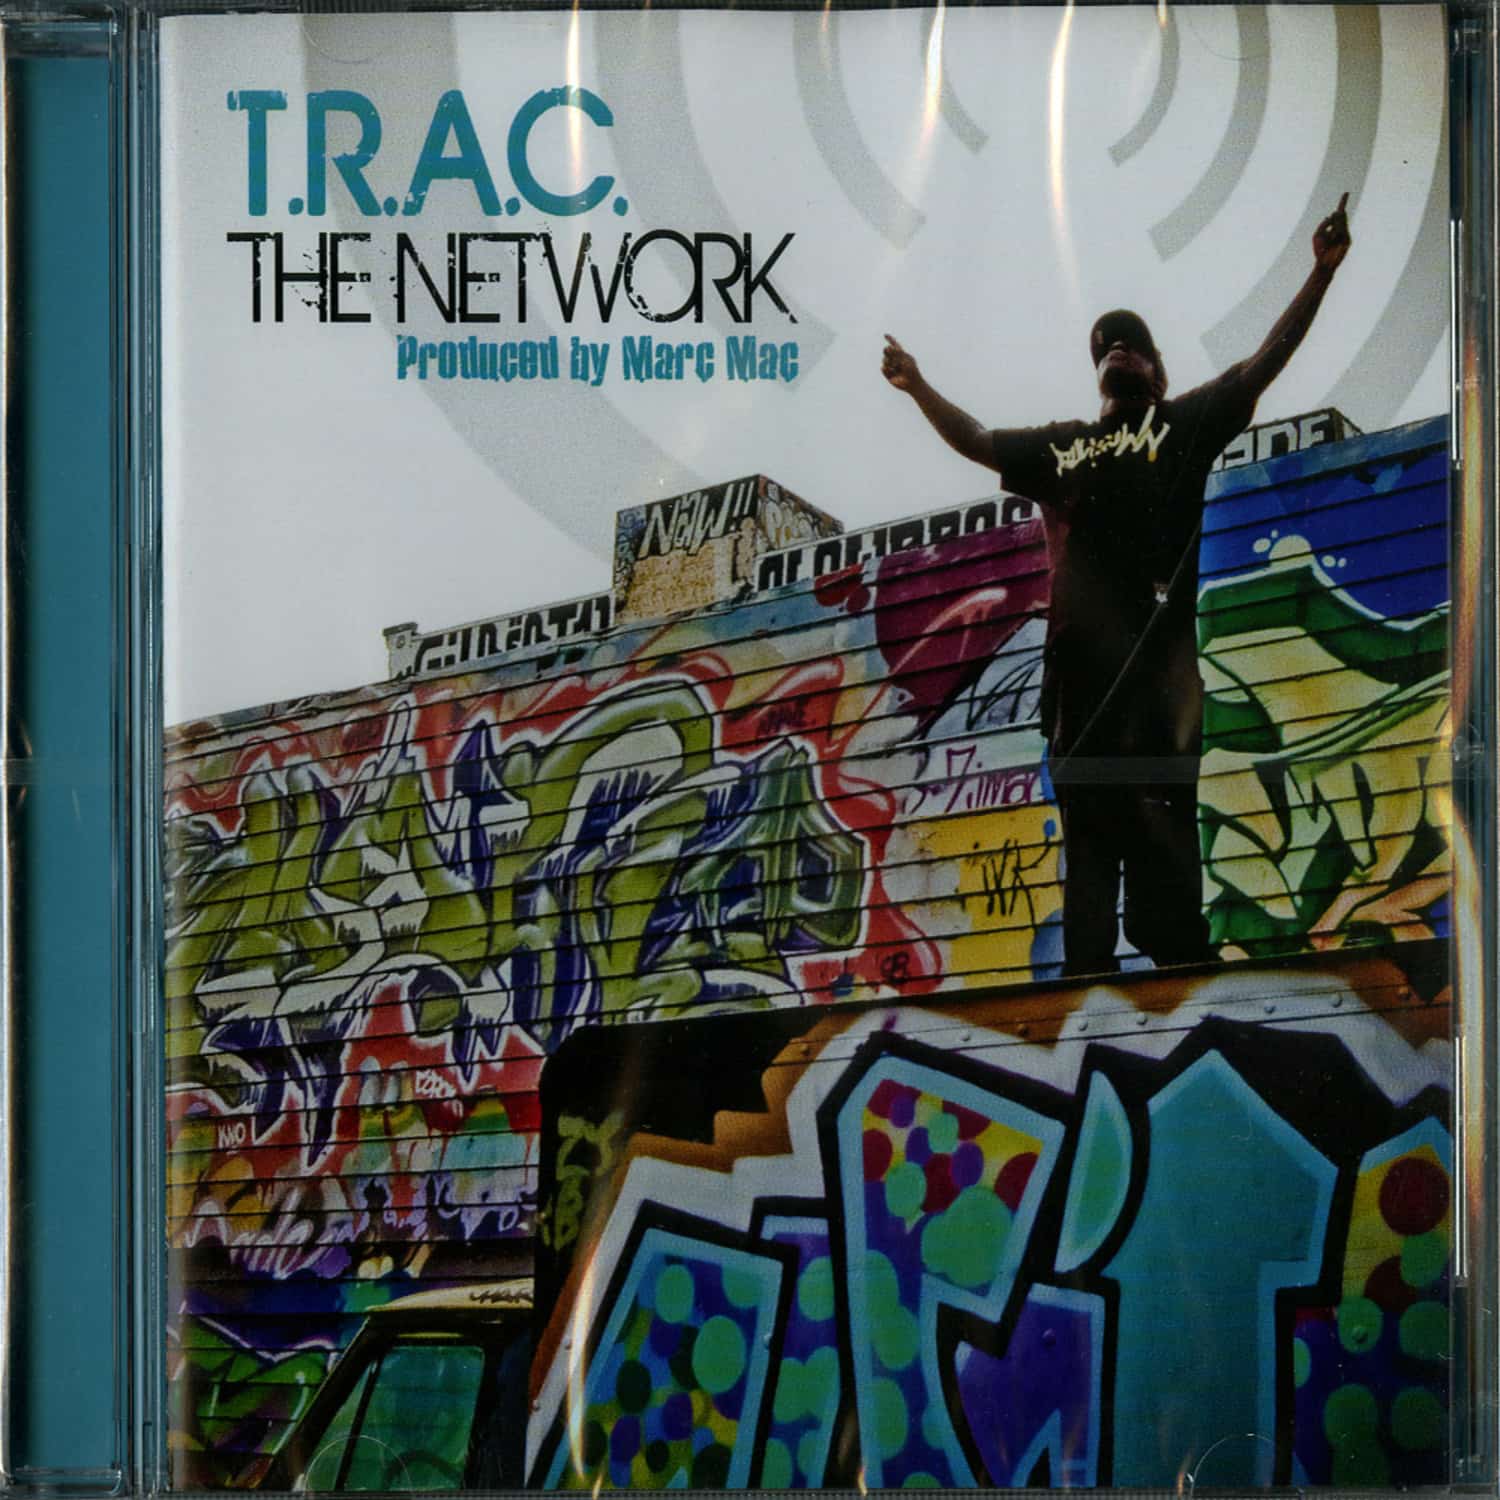 T.r.a.c. - THE NETWORK 